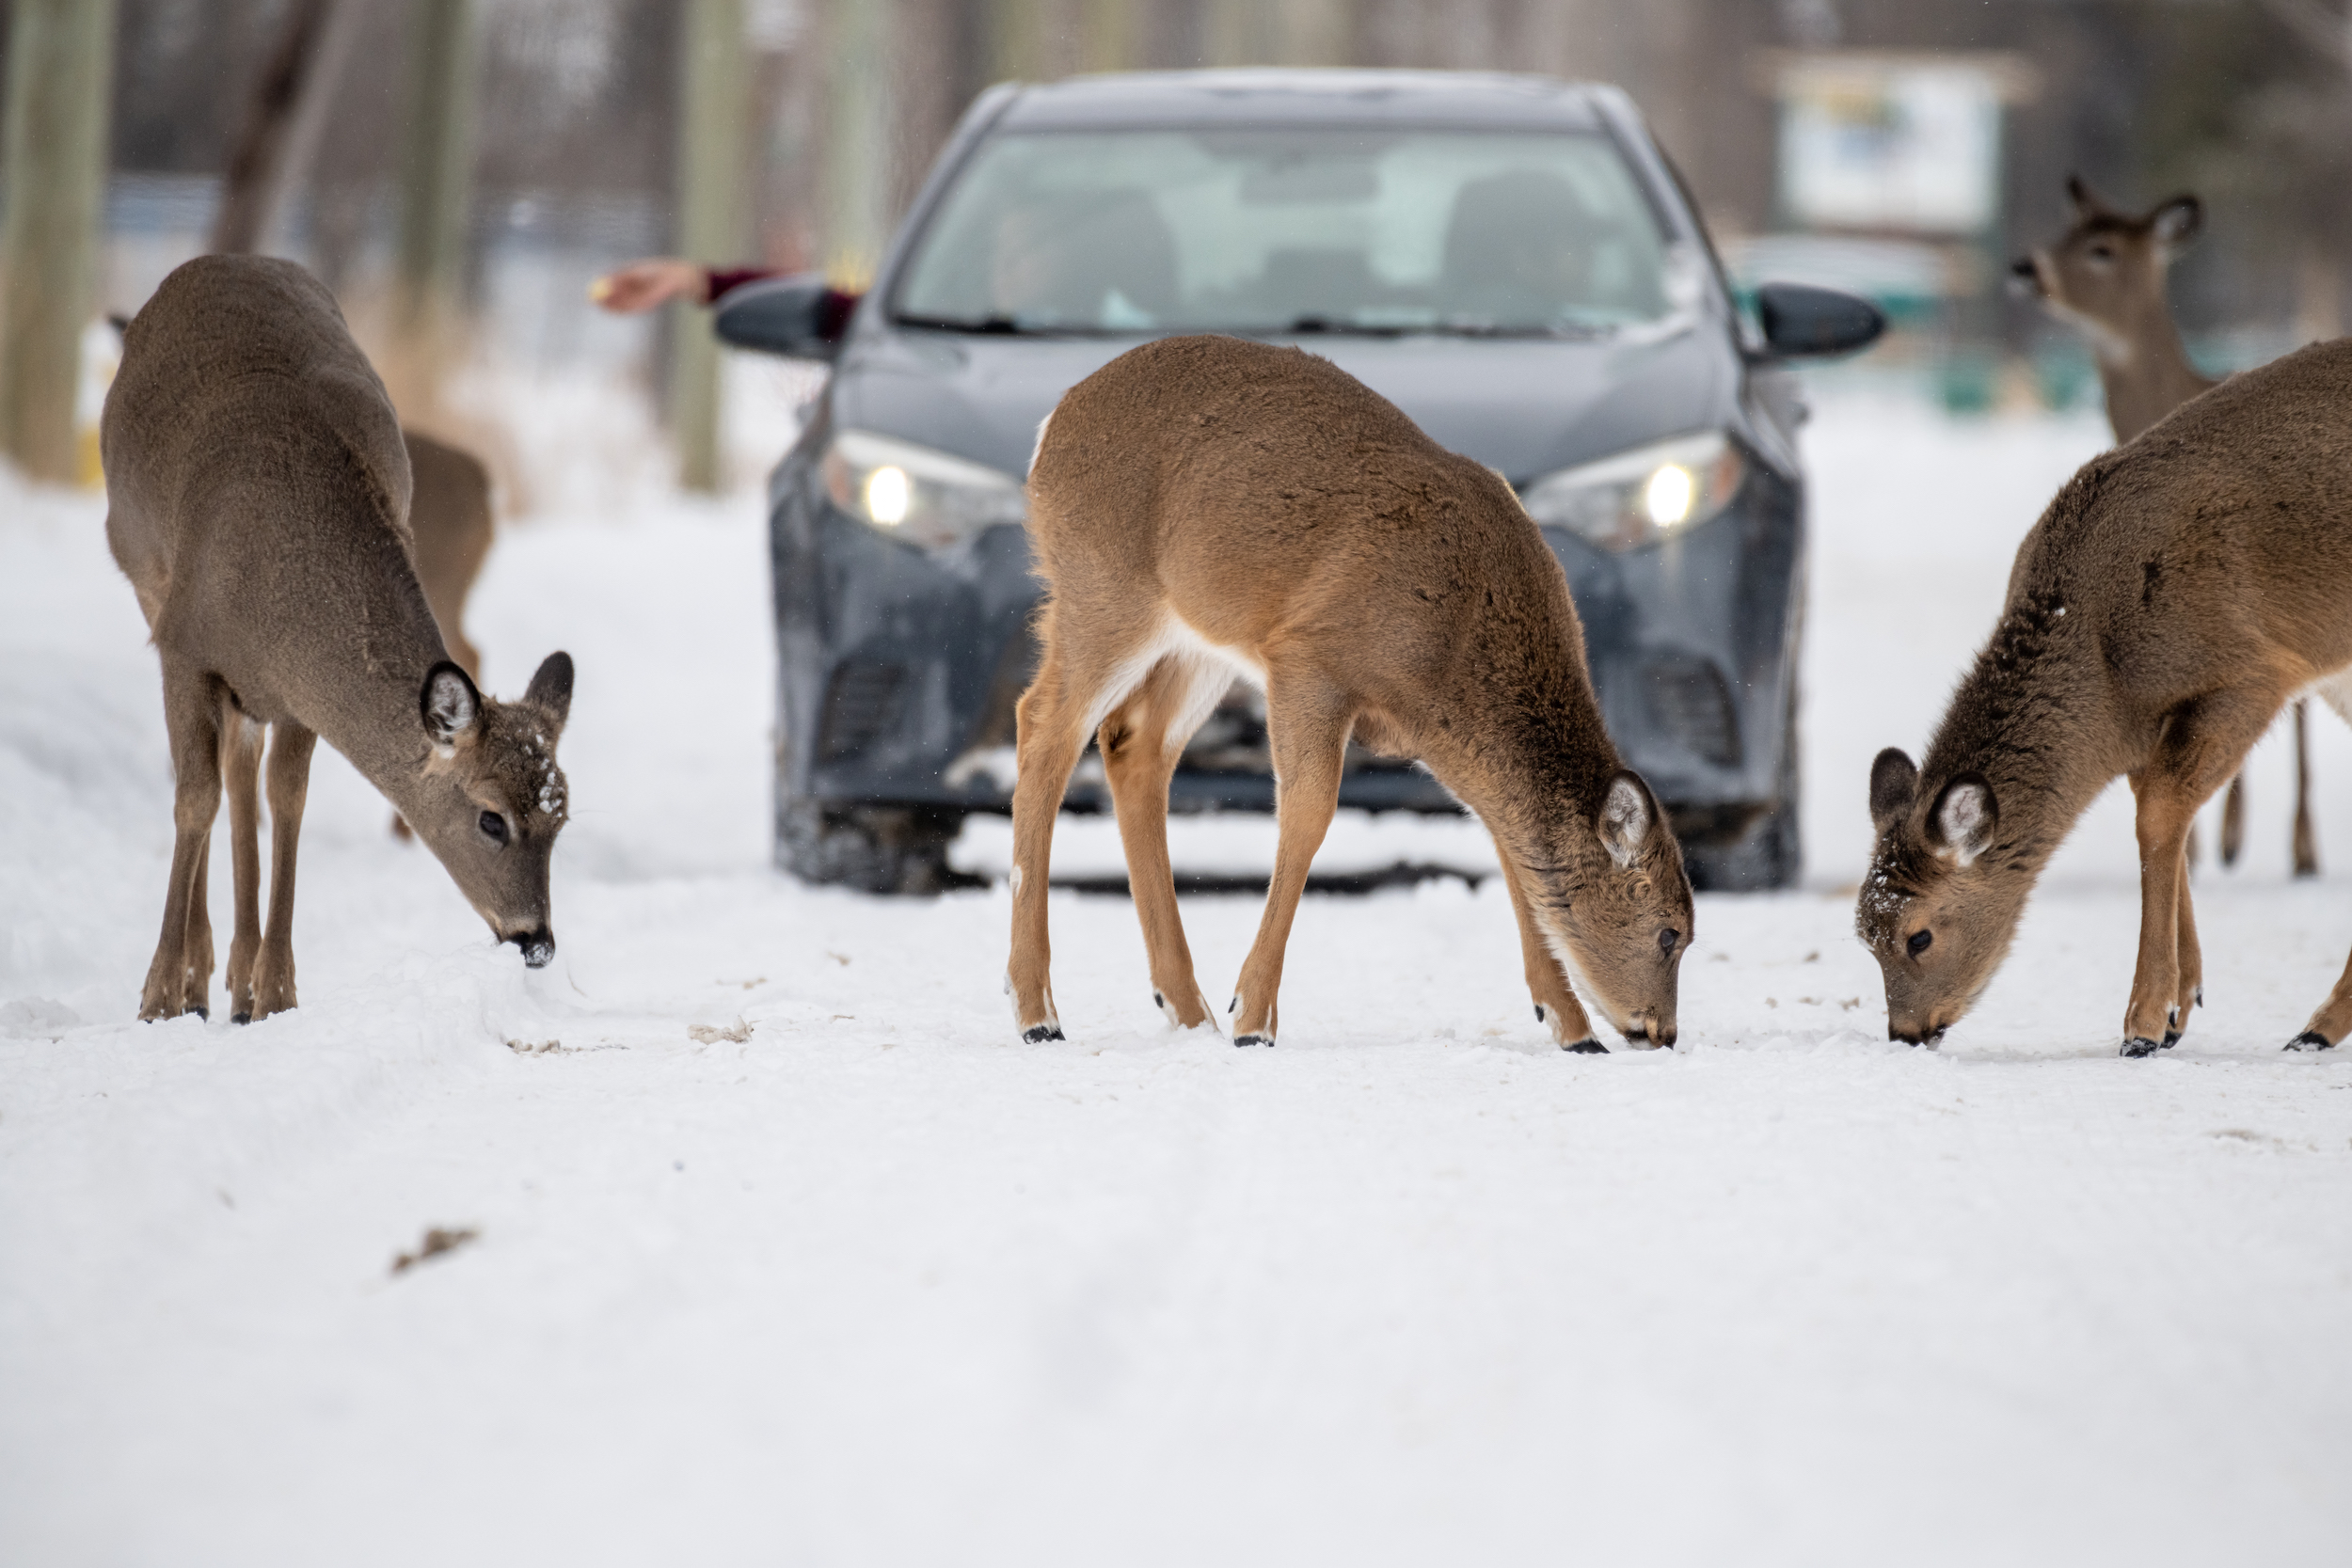 Feeding deer on Mission Island is a Thunder Bay ritual, but scientists say it poses multiple risks to wildlife.